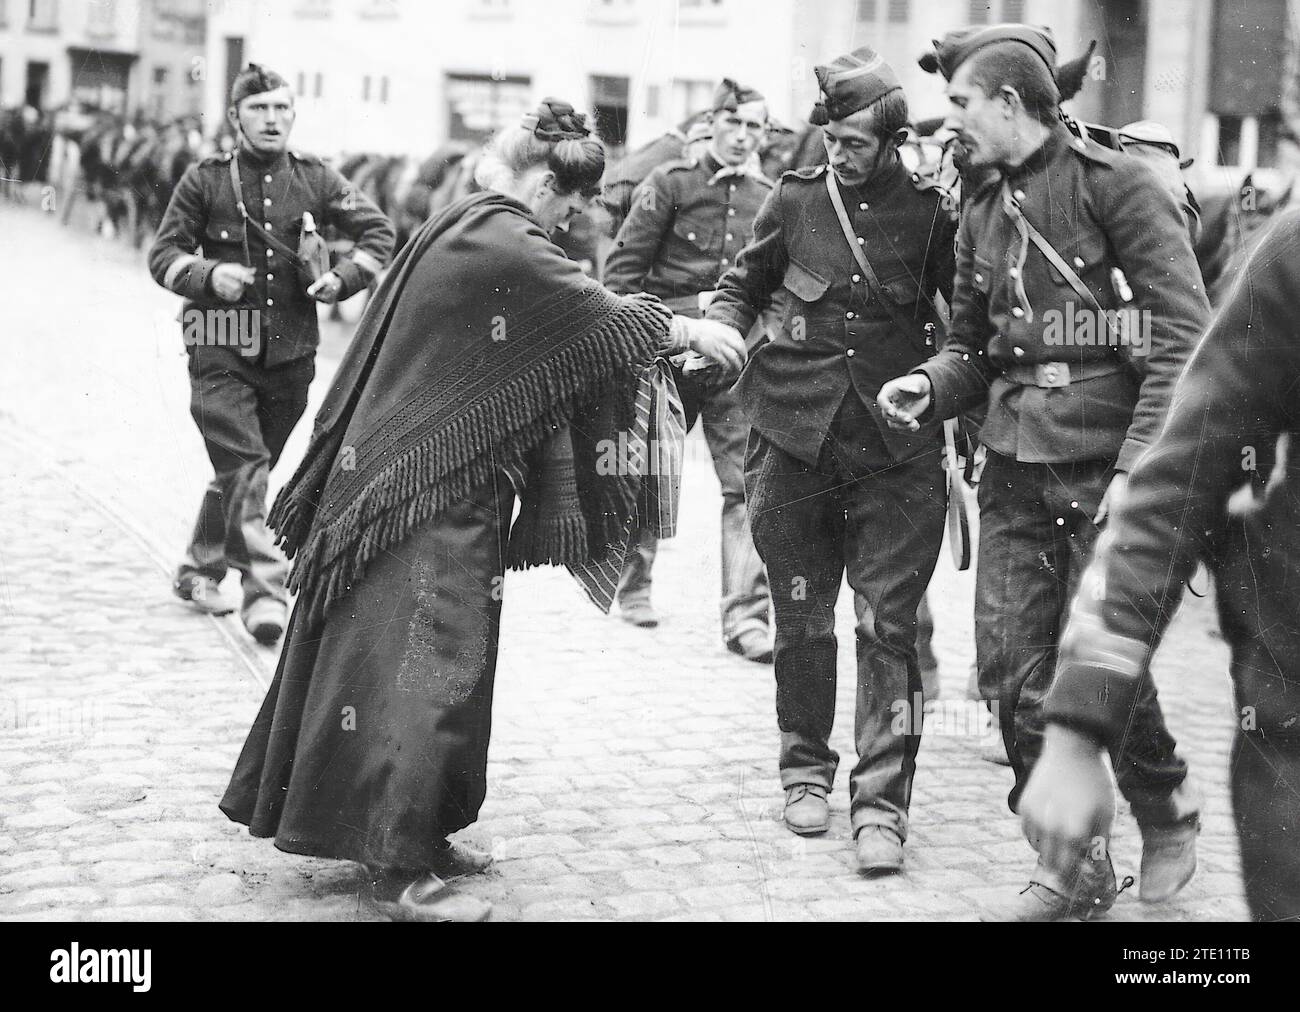 11/30/1914. The people and the Belgian army. Residents of Wetteren Distributing bread to the troops as they pass through the town. Credit: Album / Archivo ABC Stock Photo